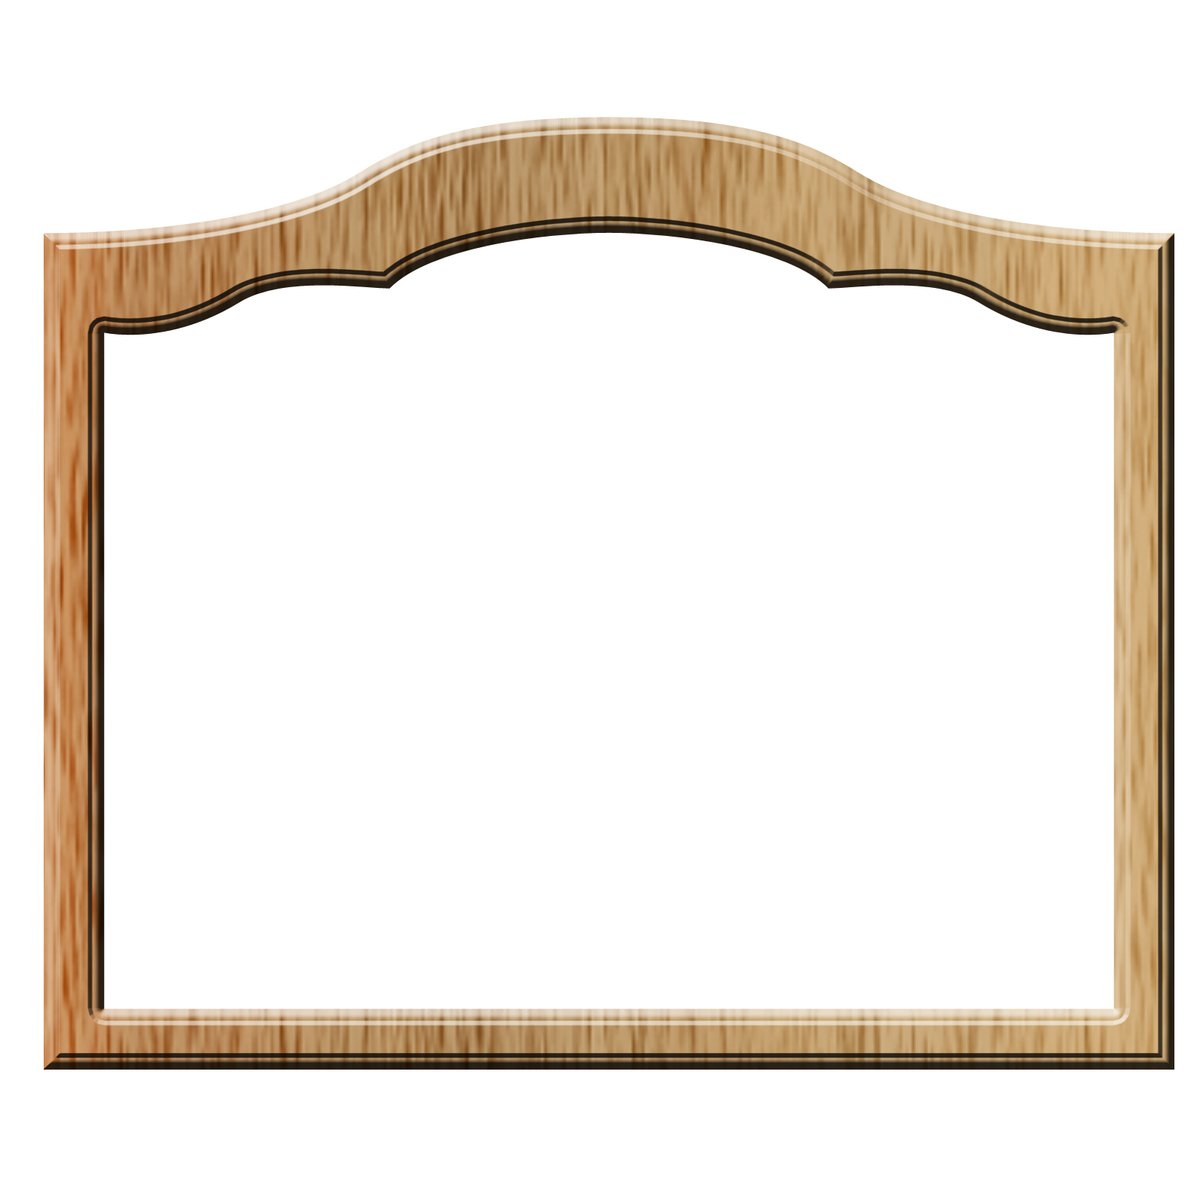 a wooden frame, with a blank area for the image